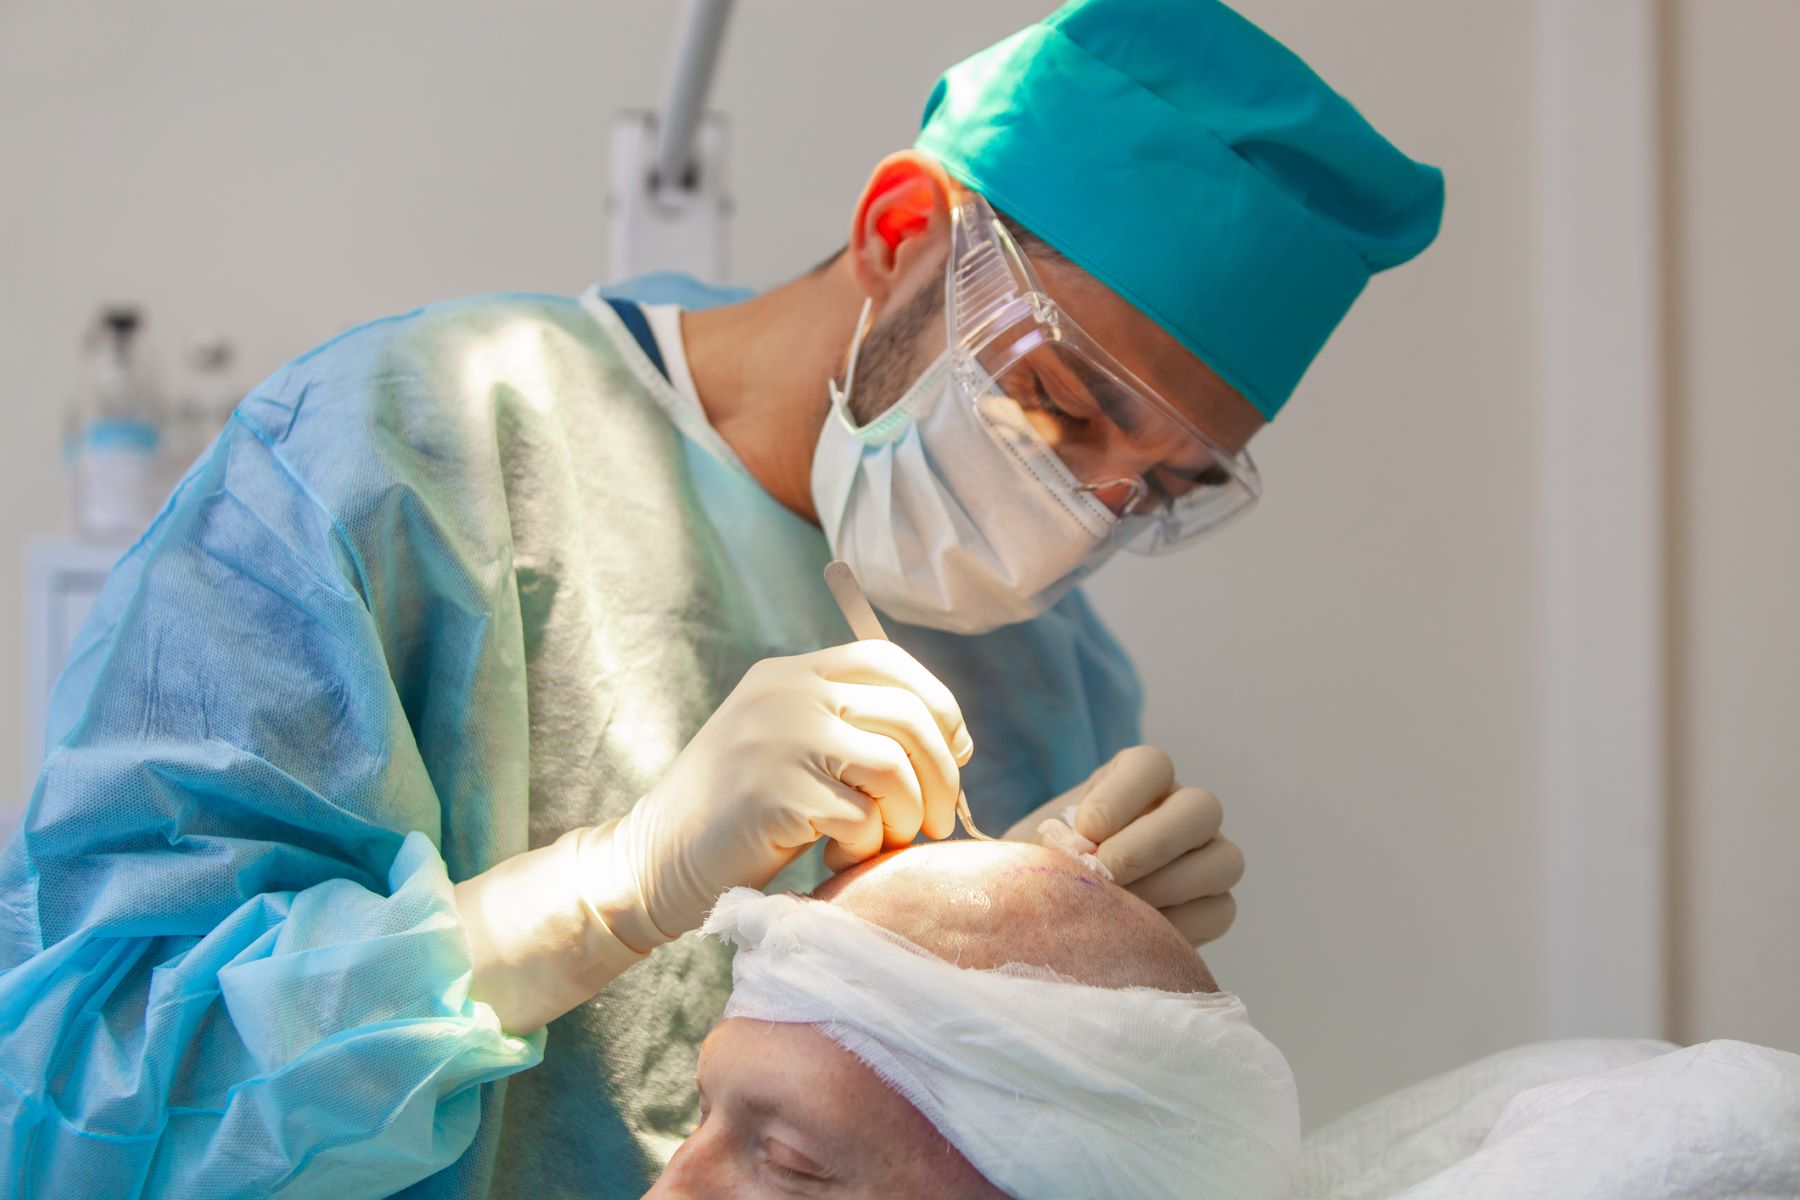 A surgeon performing a hair transplant on a male patient